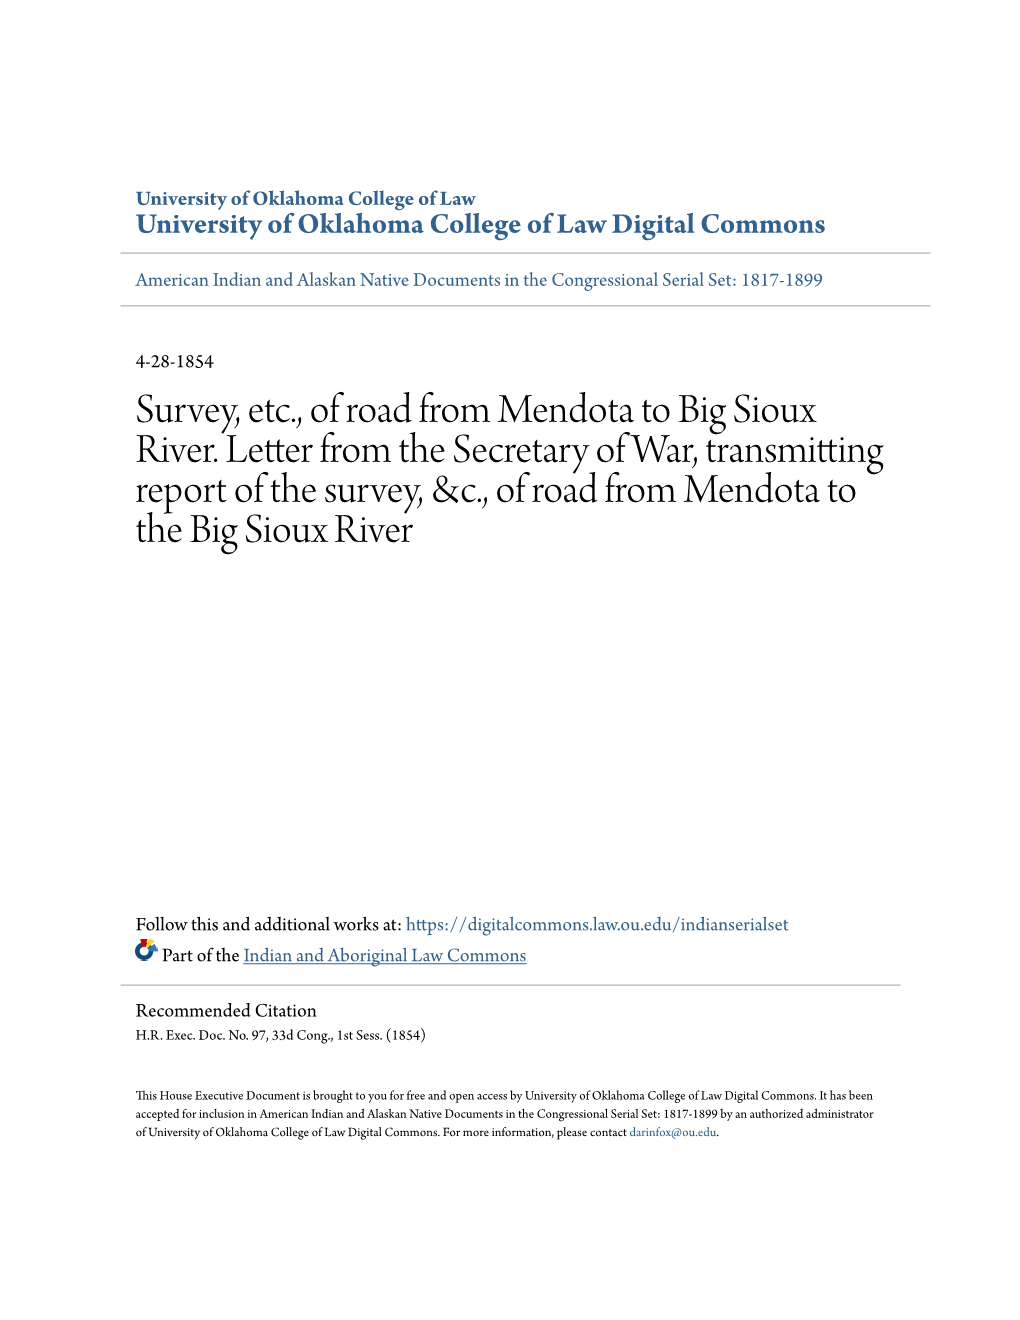 Survey, Etc., of Road from Mendota to Big Sioux River. Letter from The